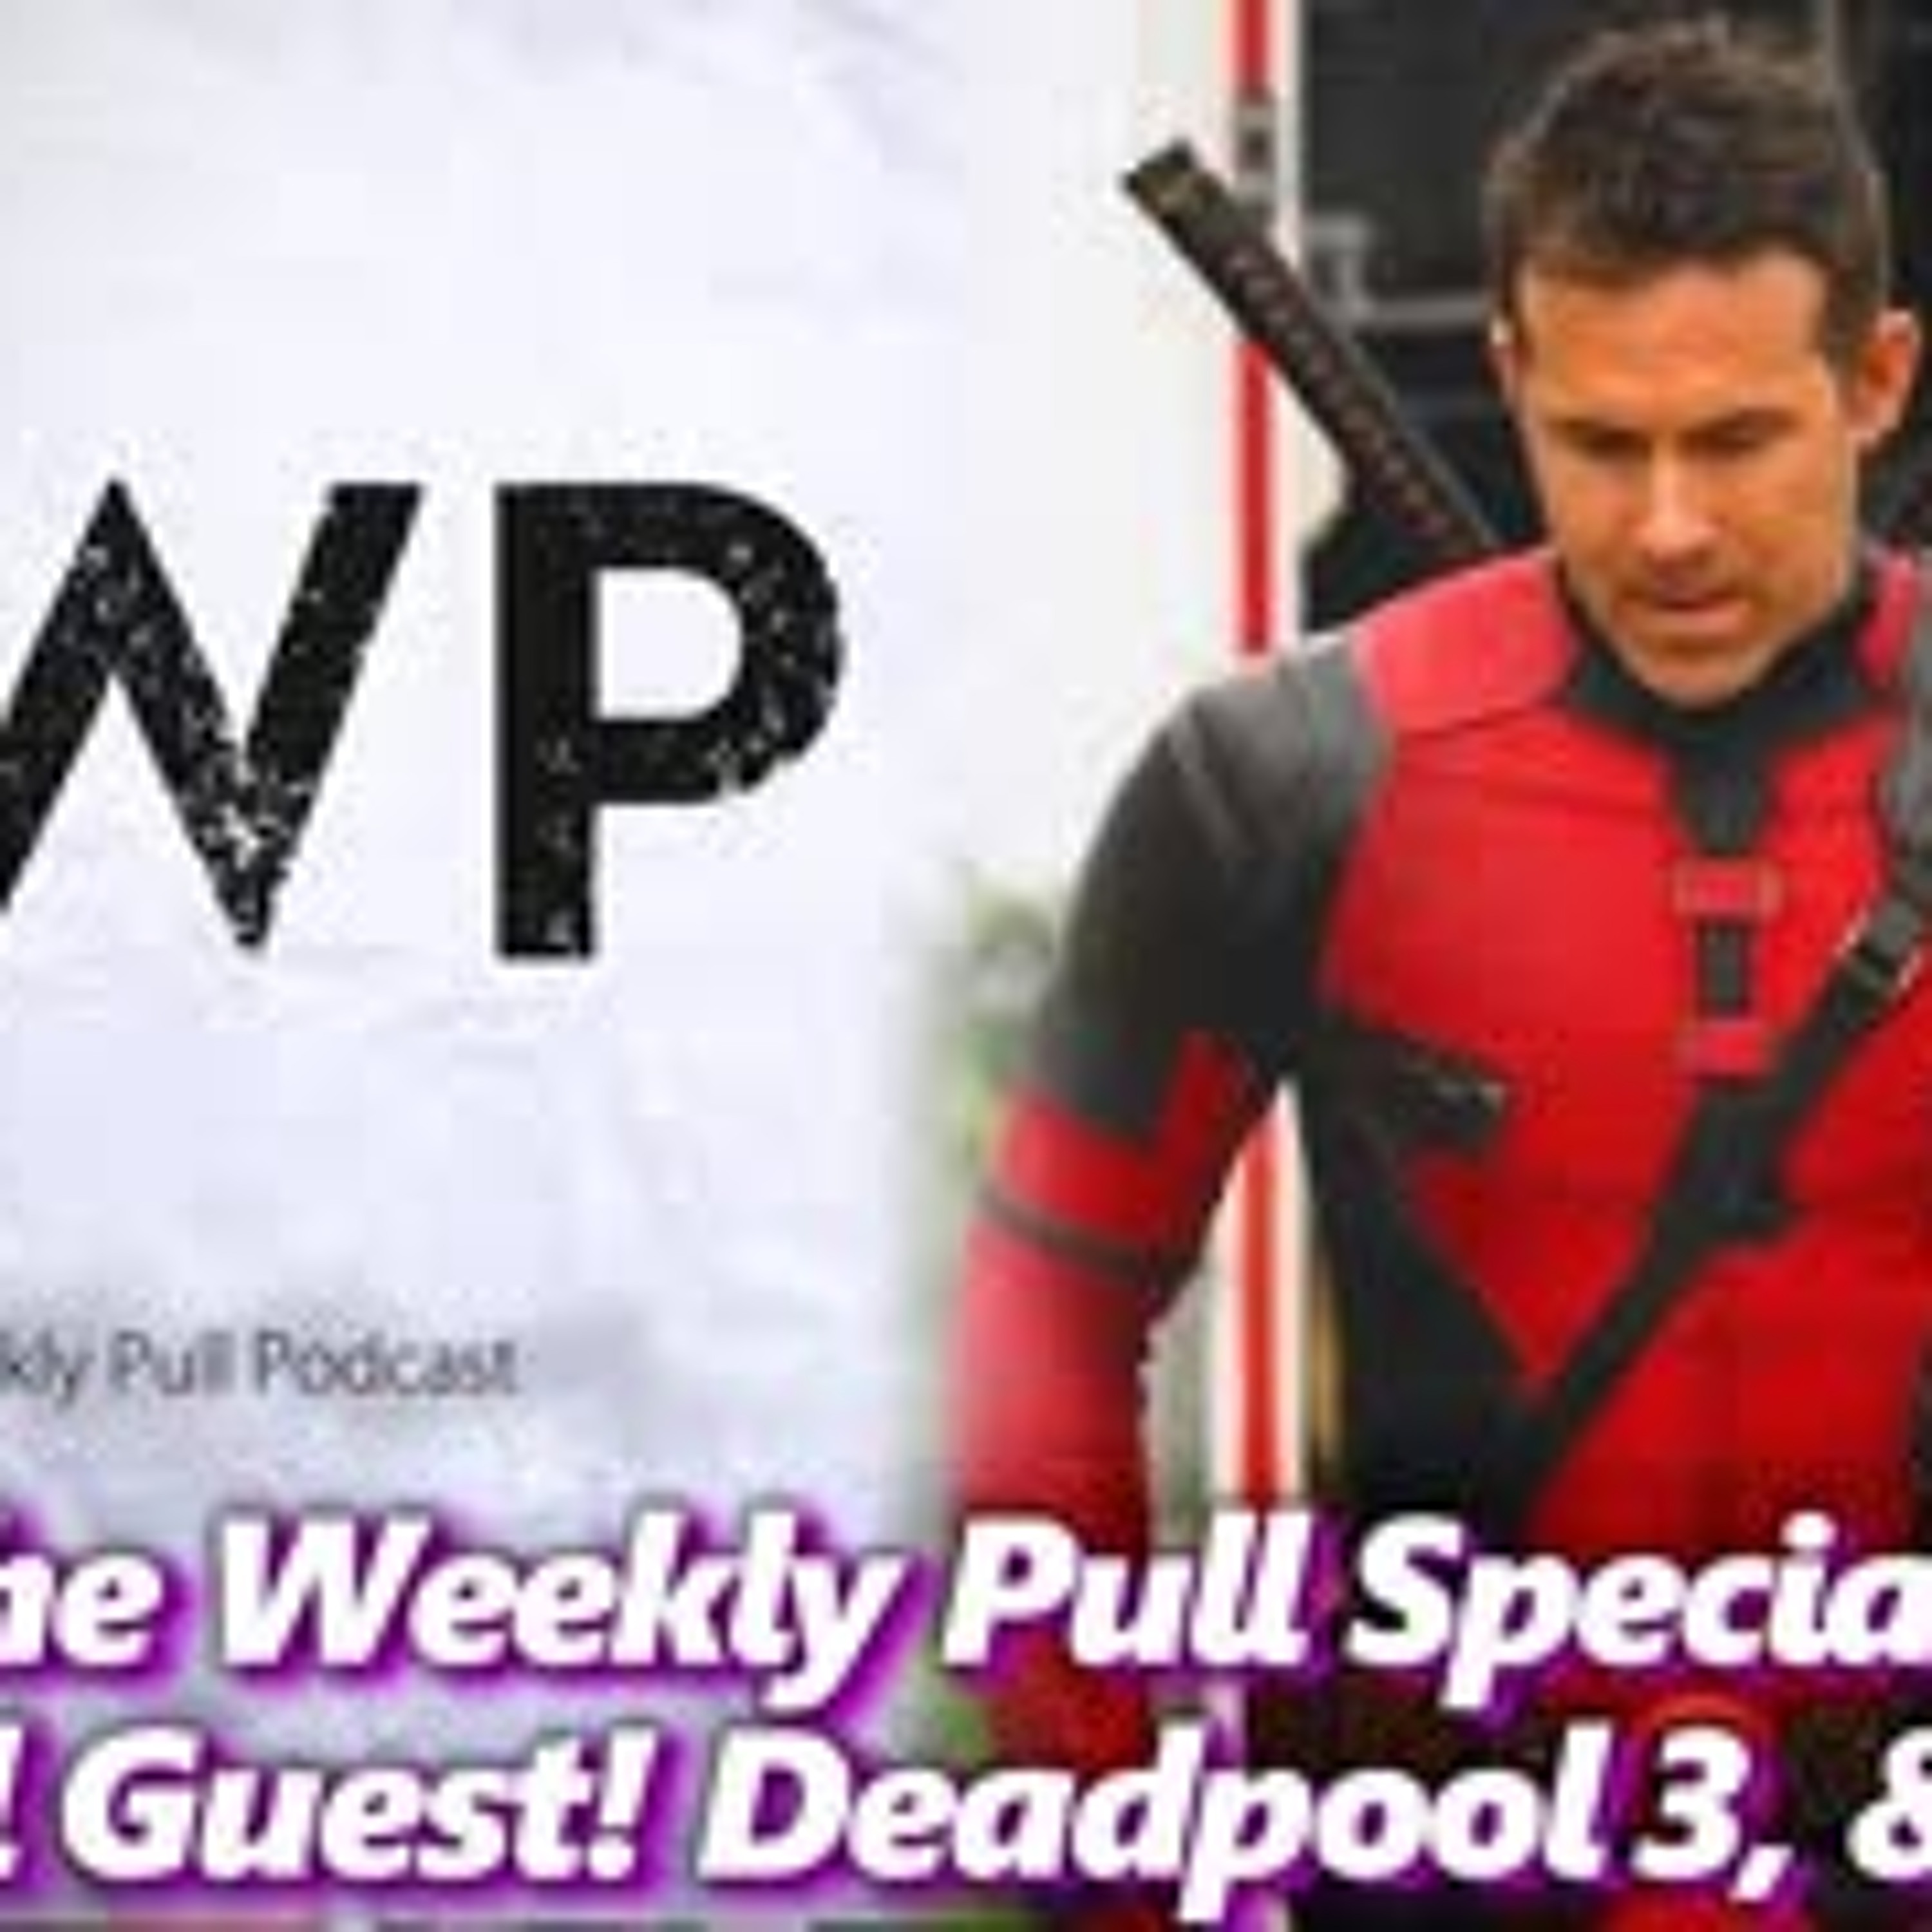 New Deadpool 3 look, Special Guest ComicsExplained! & More! - Absolute Comics|Absolutely Marvel & DC